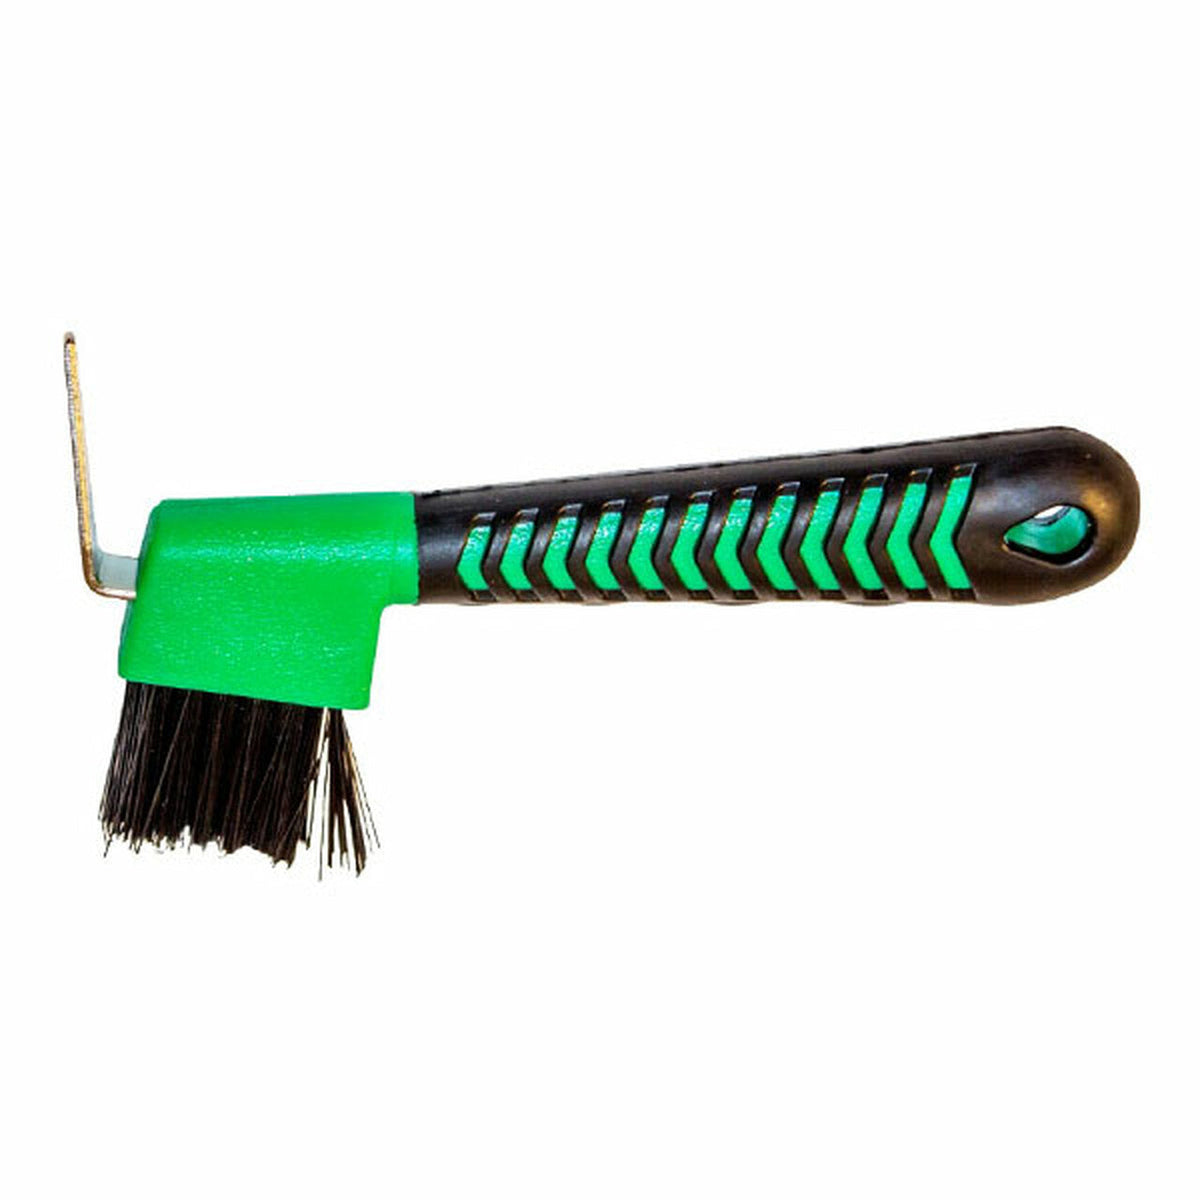 Side view of green hoof pick with black shaped handle and bristles.